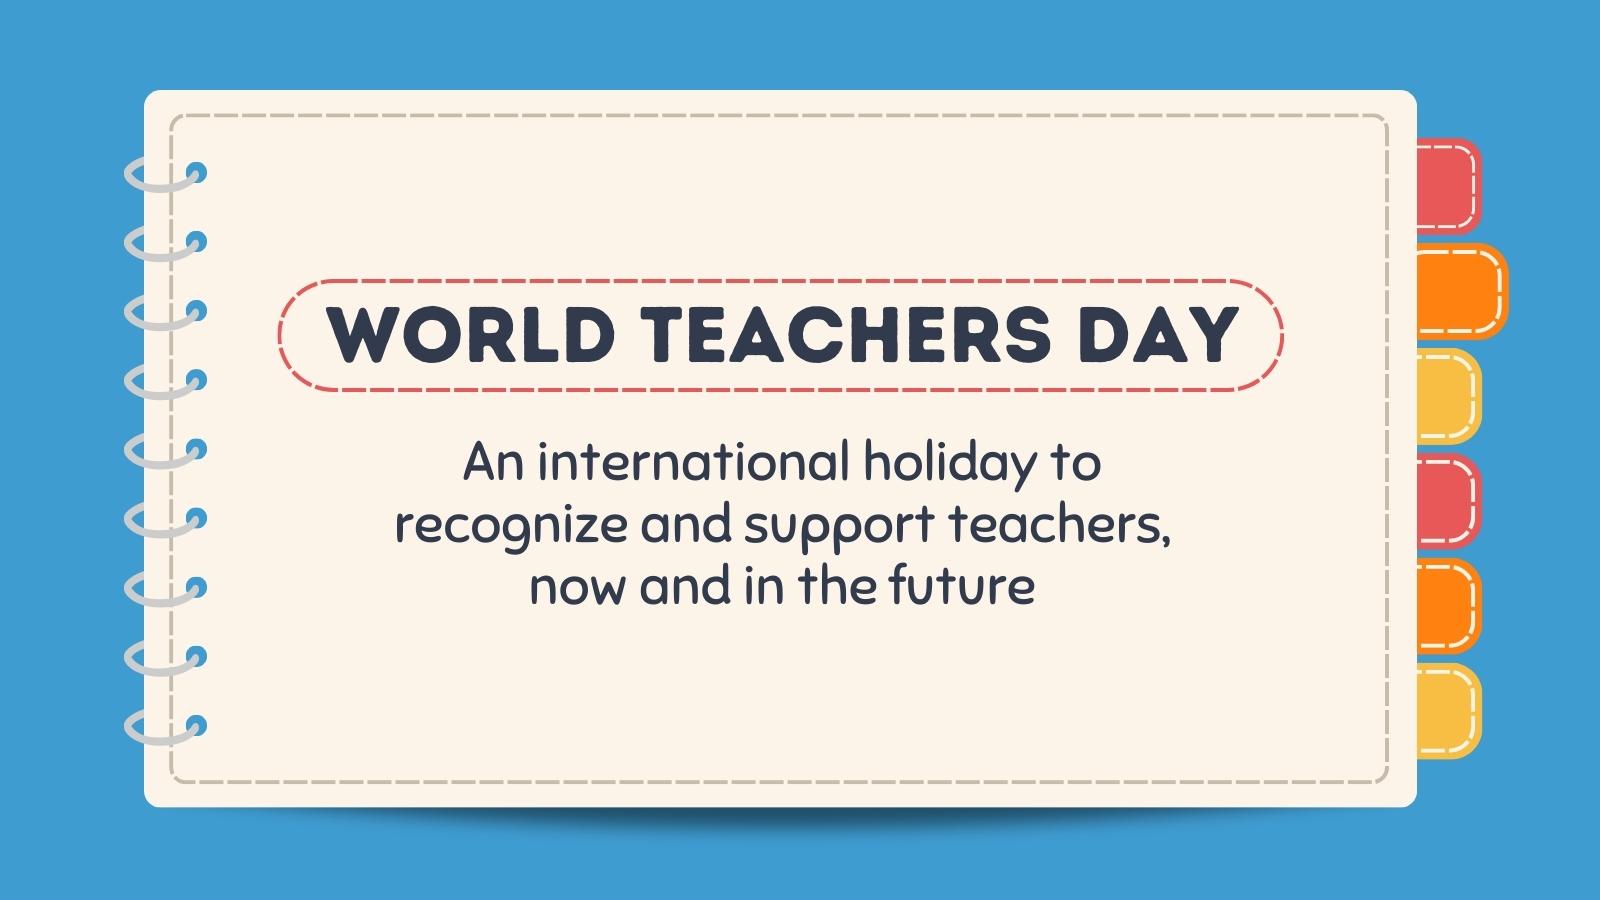 Spiral notebook illustration that says World Teachers Day: An international holiday to recognize and support teachers, now and in the future